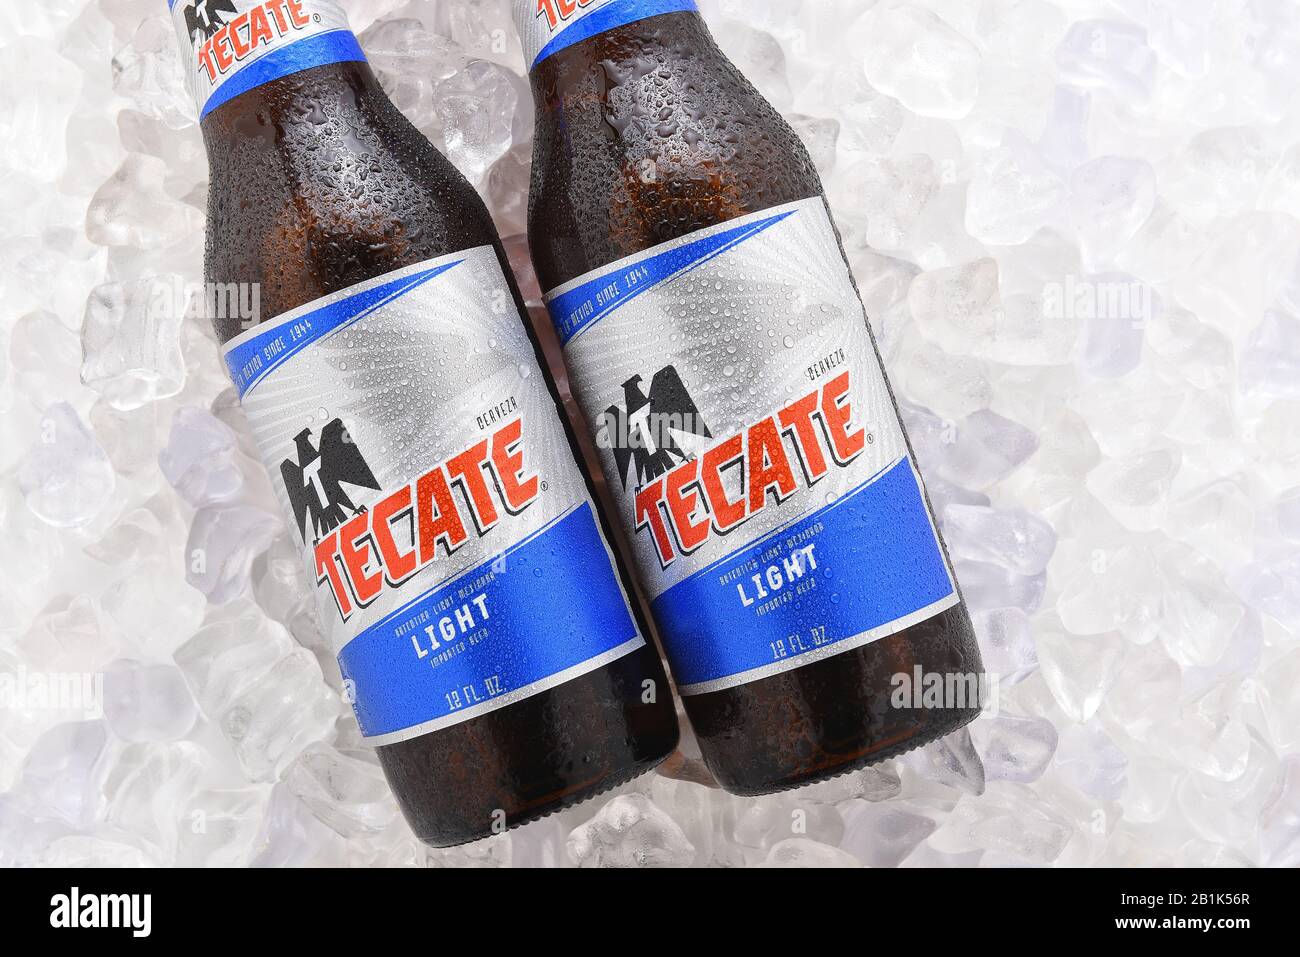 IRVINE, CA - JUNE 14, 2017: Tecate Light bottles on Ice.  Two bottles of Tecate Light, a popular pale lager named after the city of Tecate, Baja Calif Stock Photo